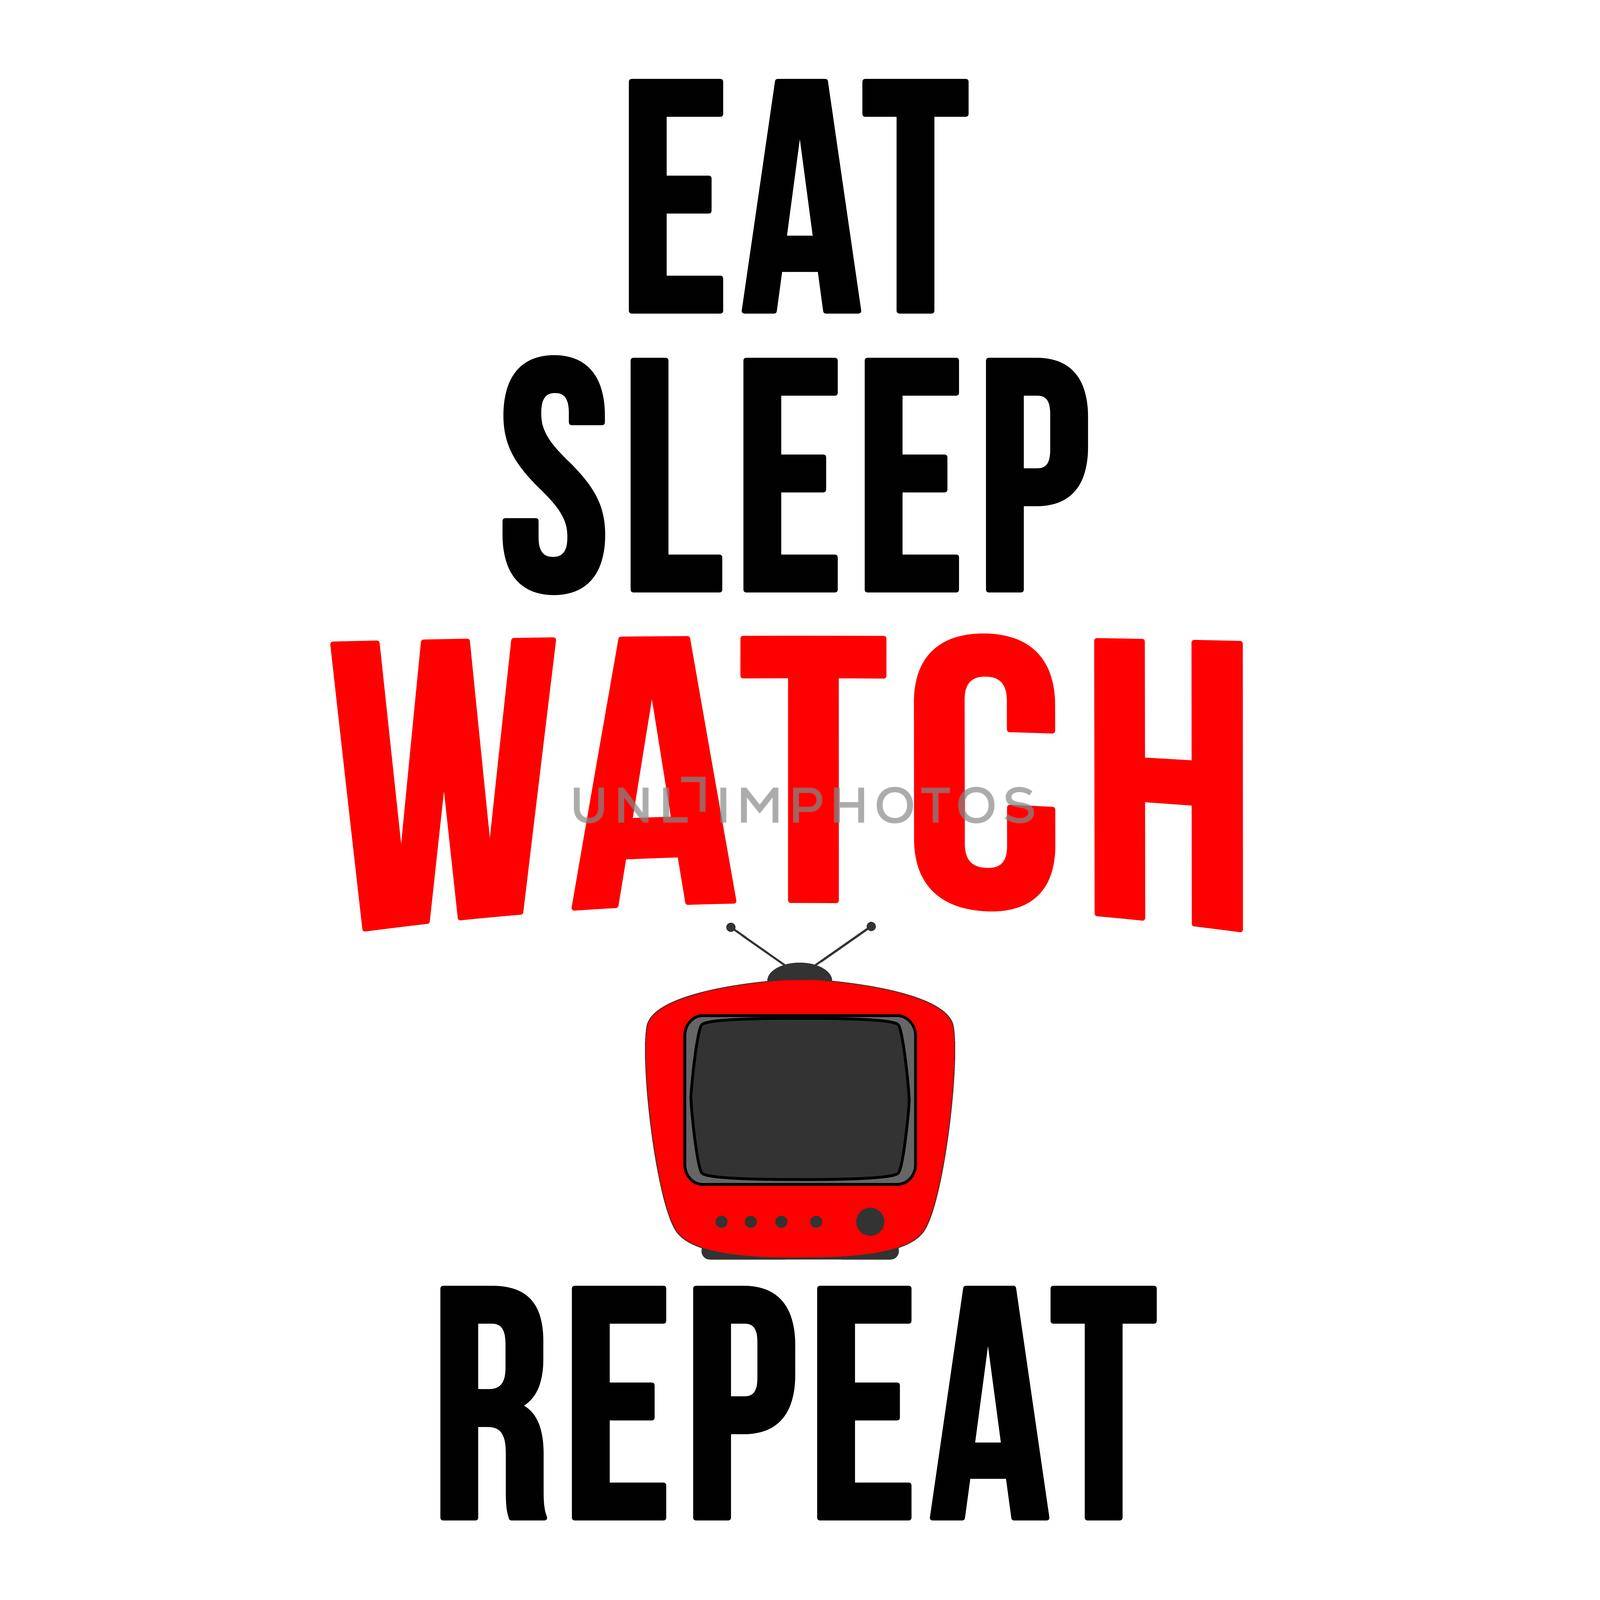 Text that says "Eat sleep watch repeat" with a TV icon.